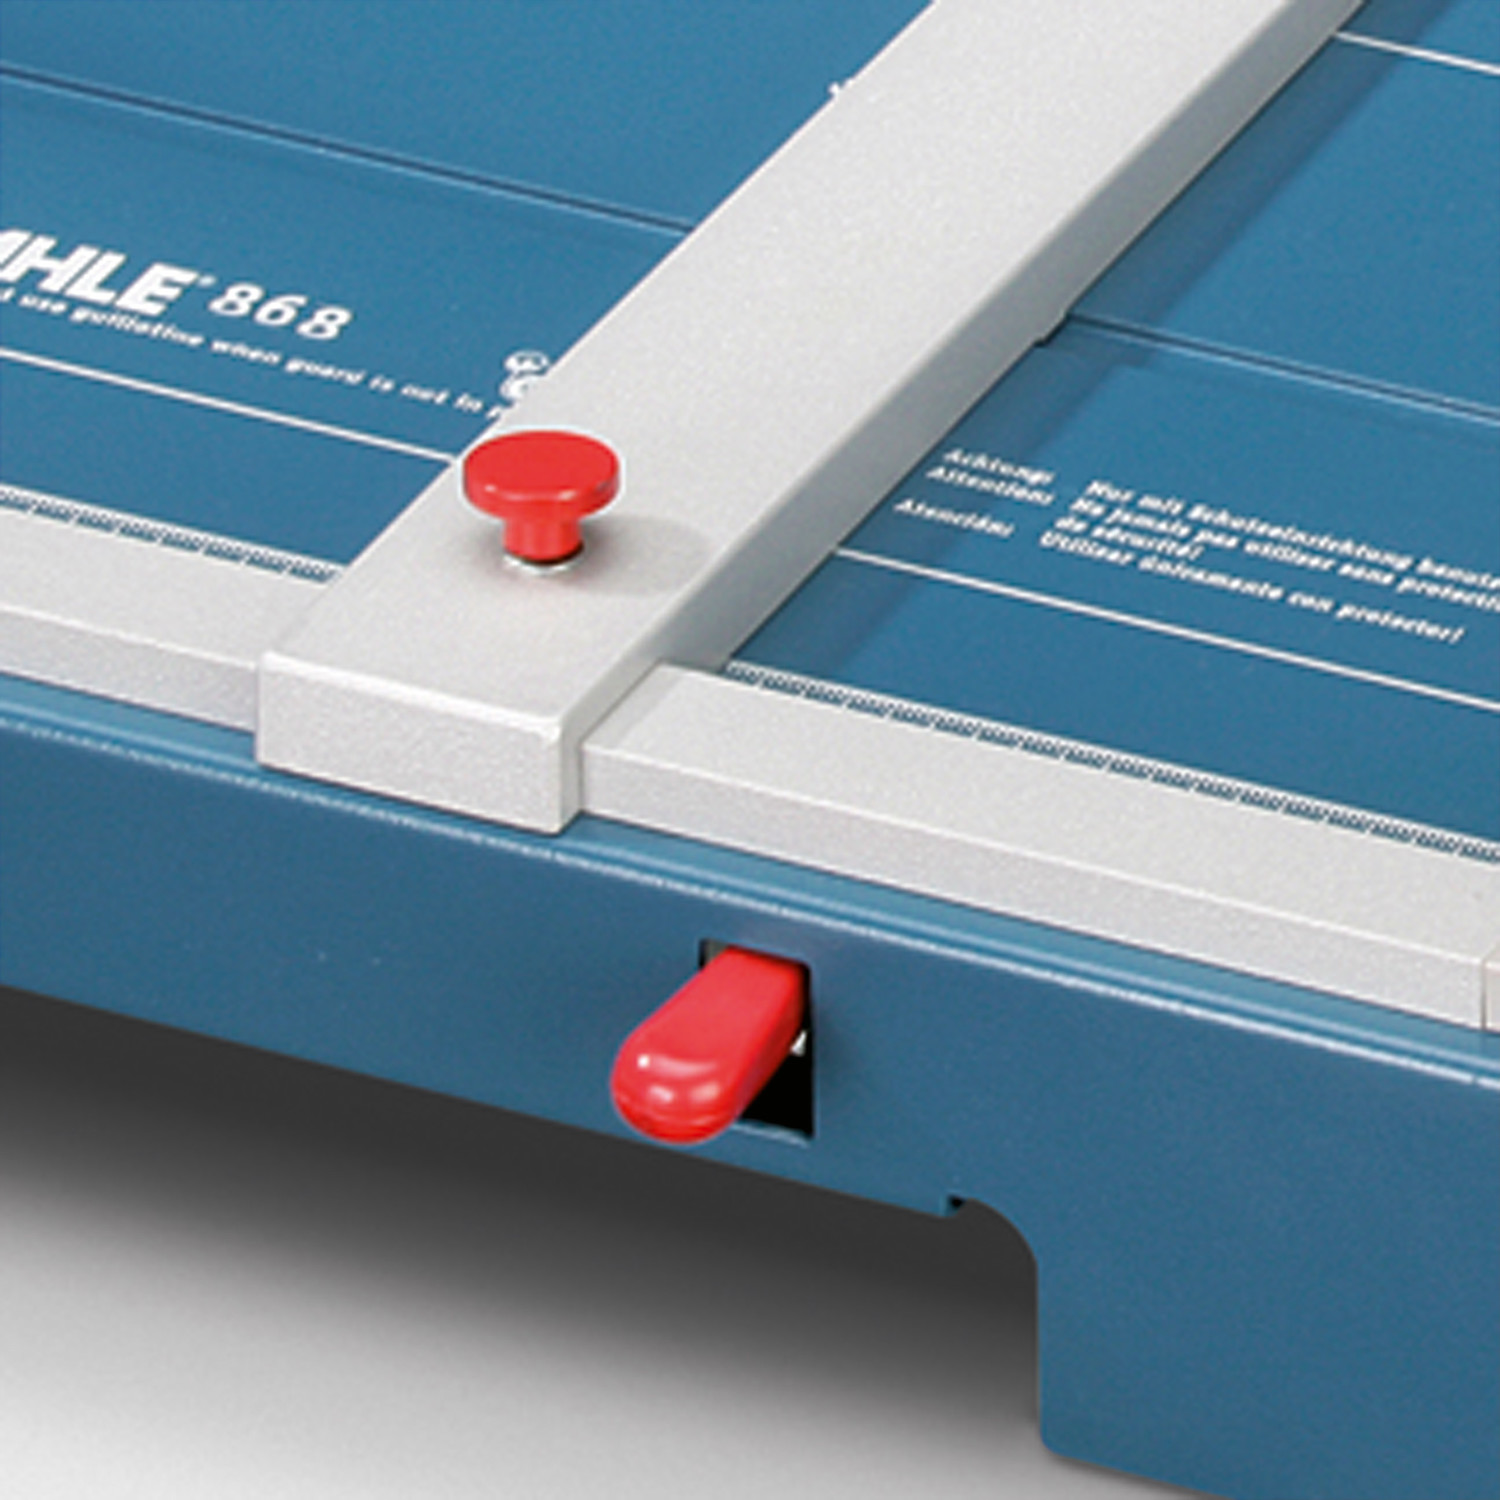 Automatic, de-selectable clamping makes easy work of cutting pressure-sensitive materials